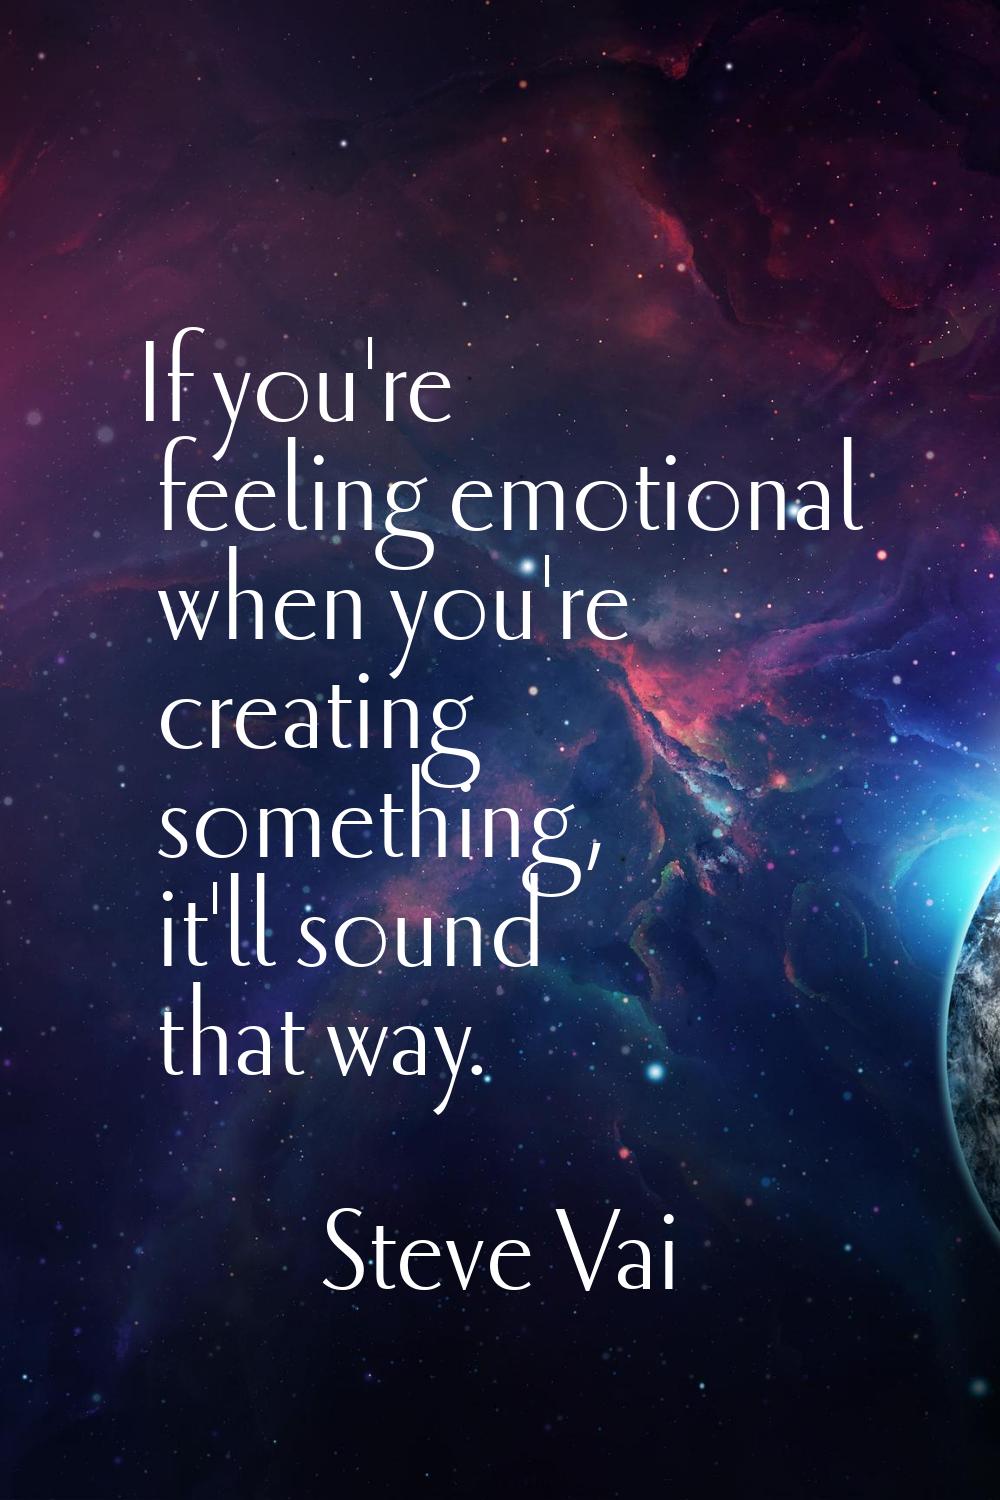 If you're feeling emotional when you're creating something, it'll sound that way.